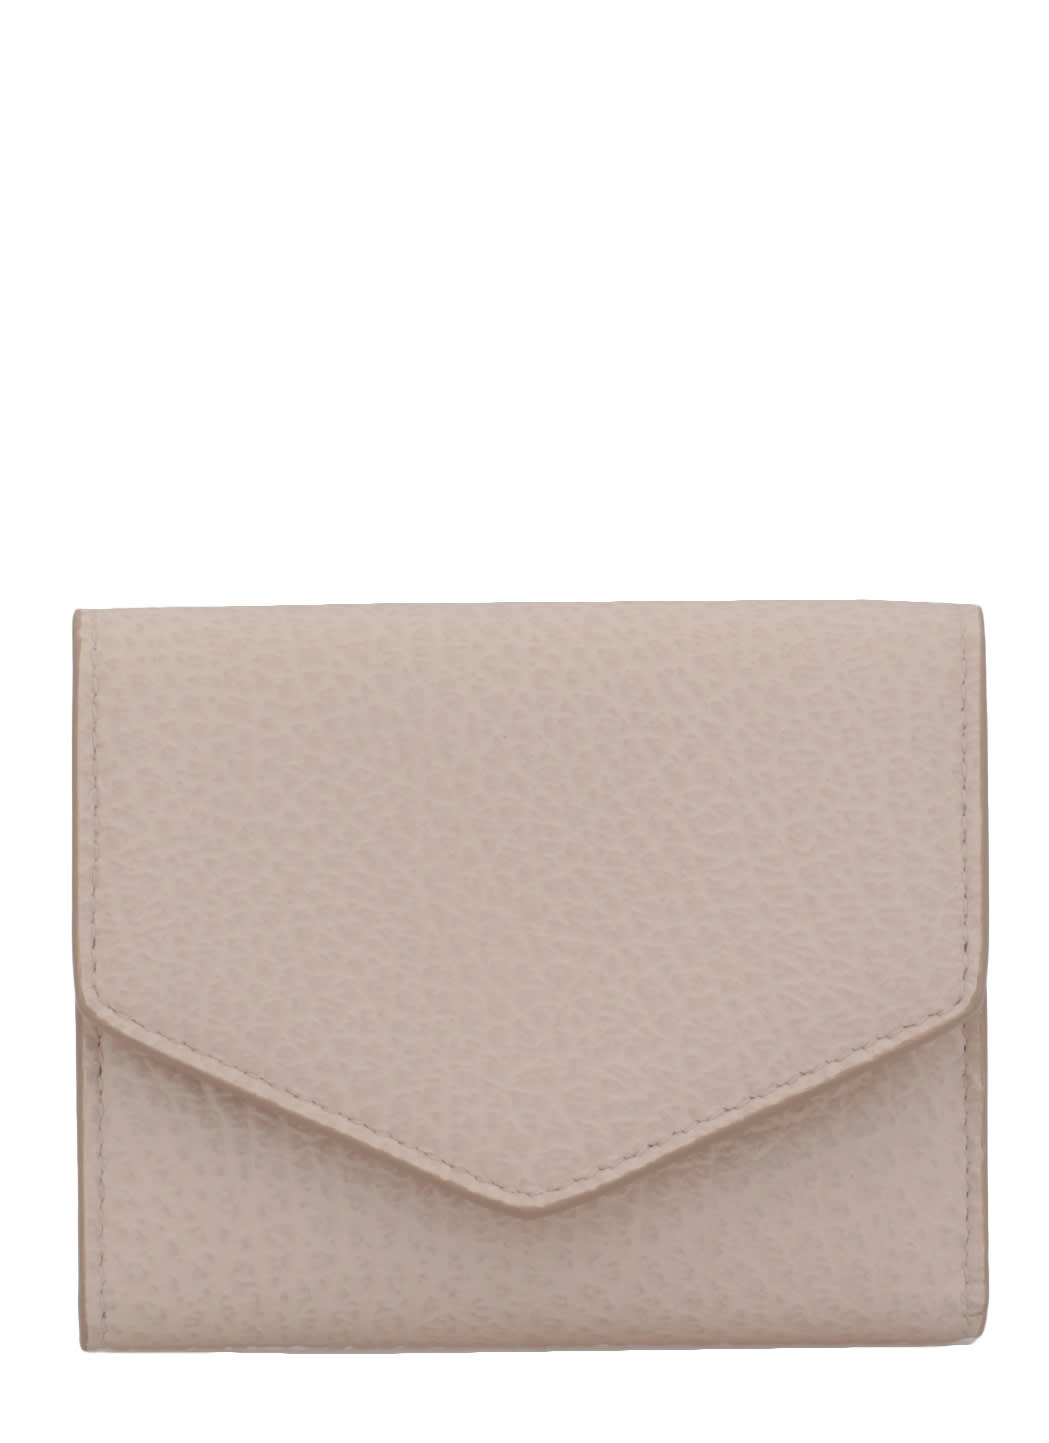 Maison Margiela Creased Leather Wallet In Naturale